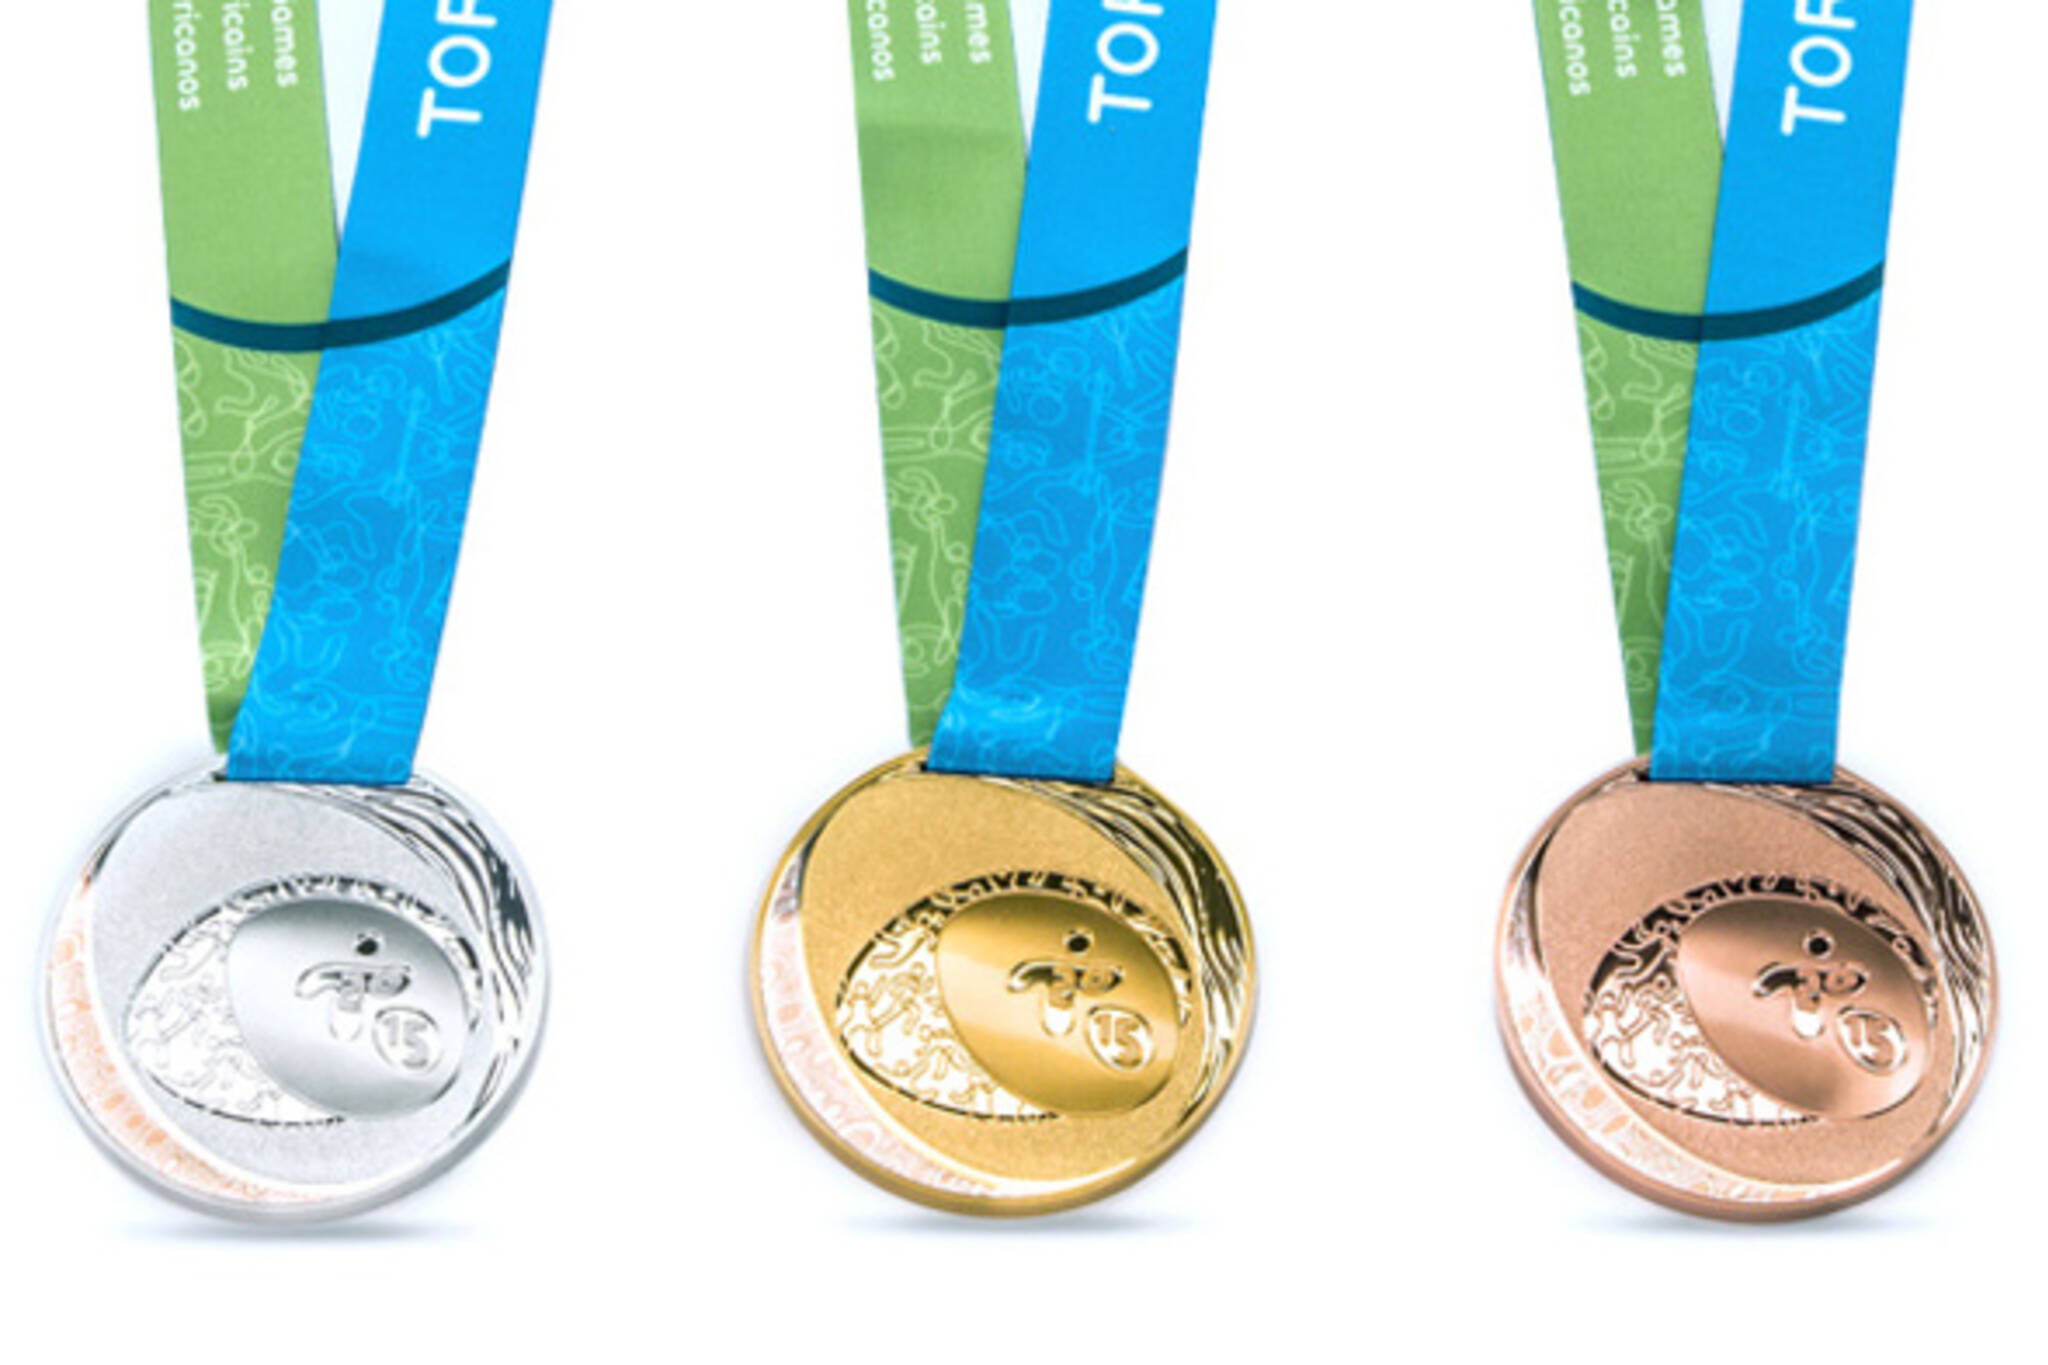 This is what the Pan Am Games medals will look like